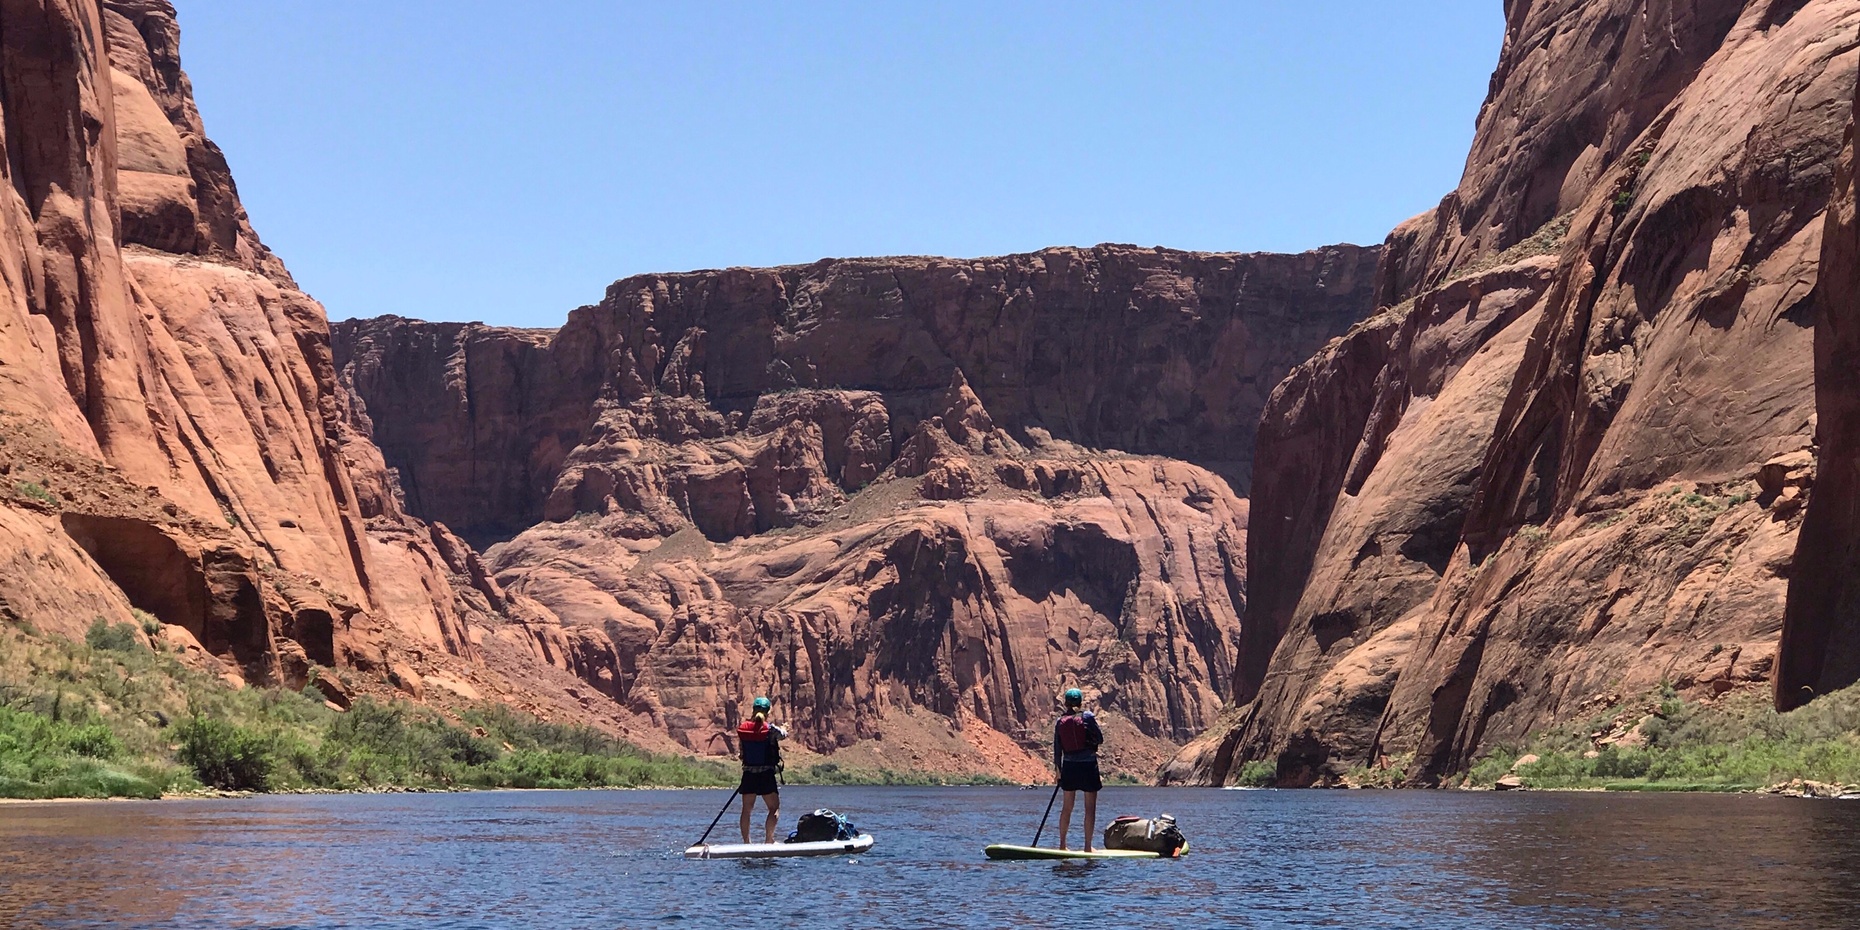 Stand-Up Paddle Board on the Colorado River